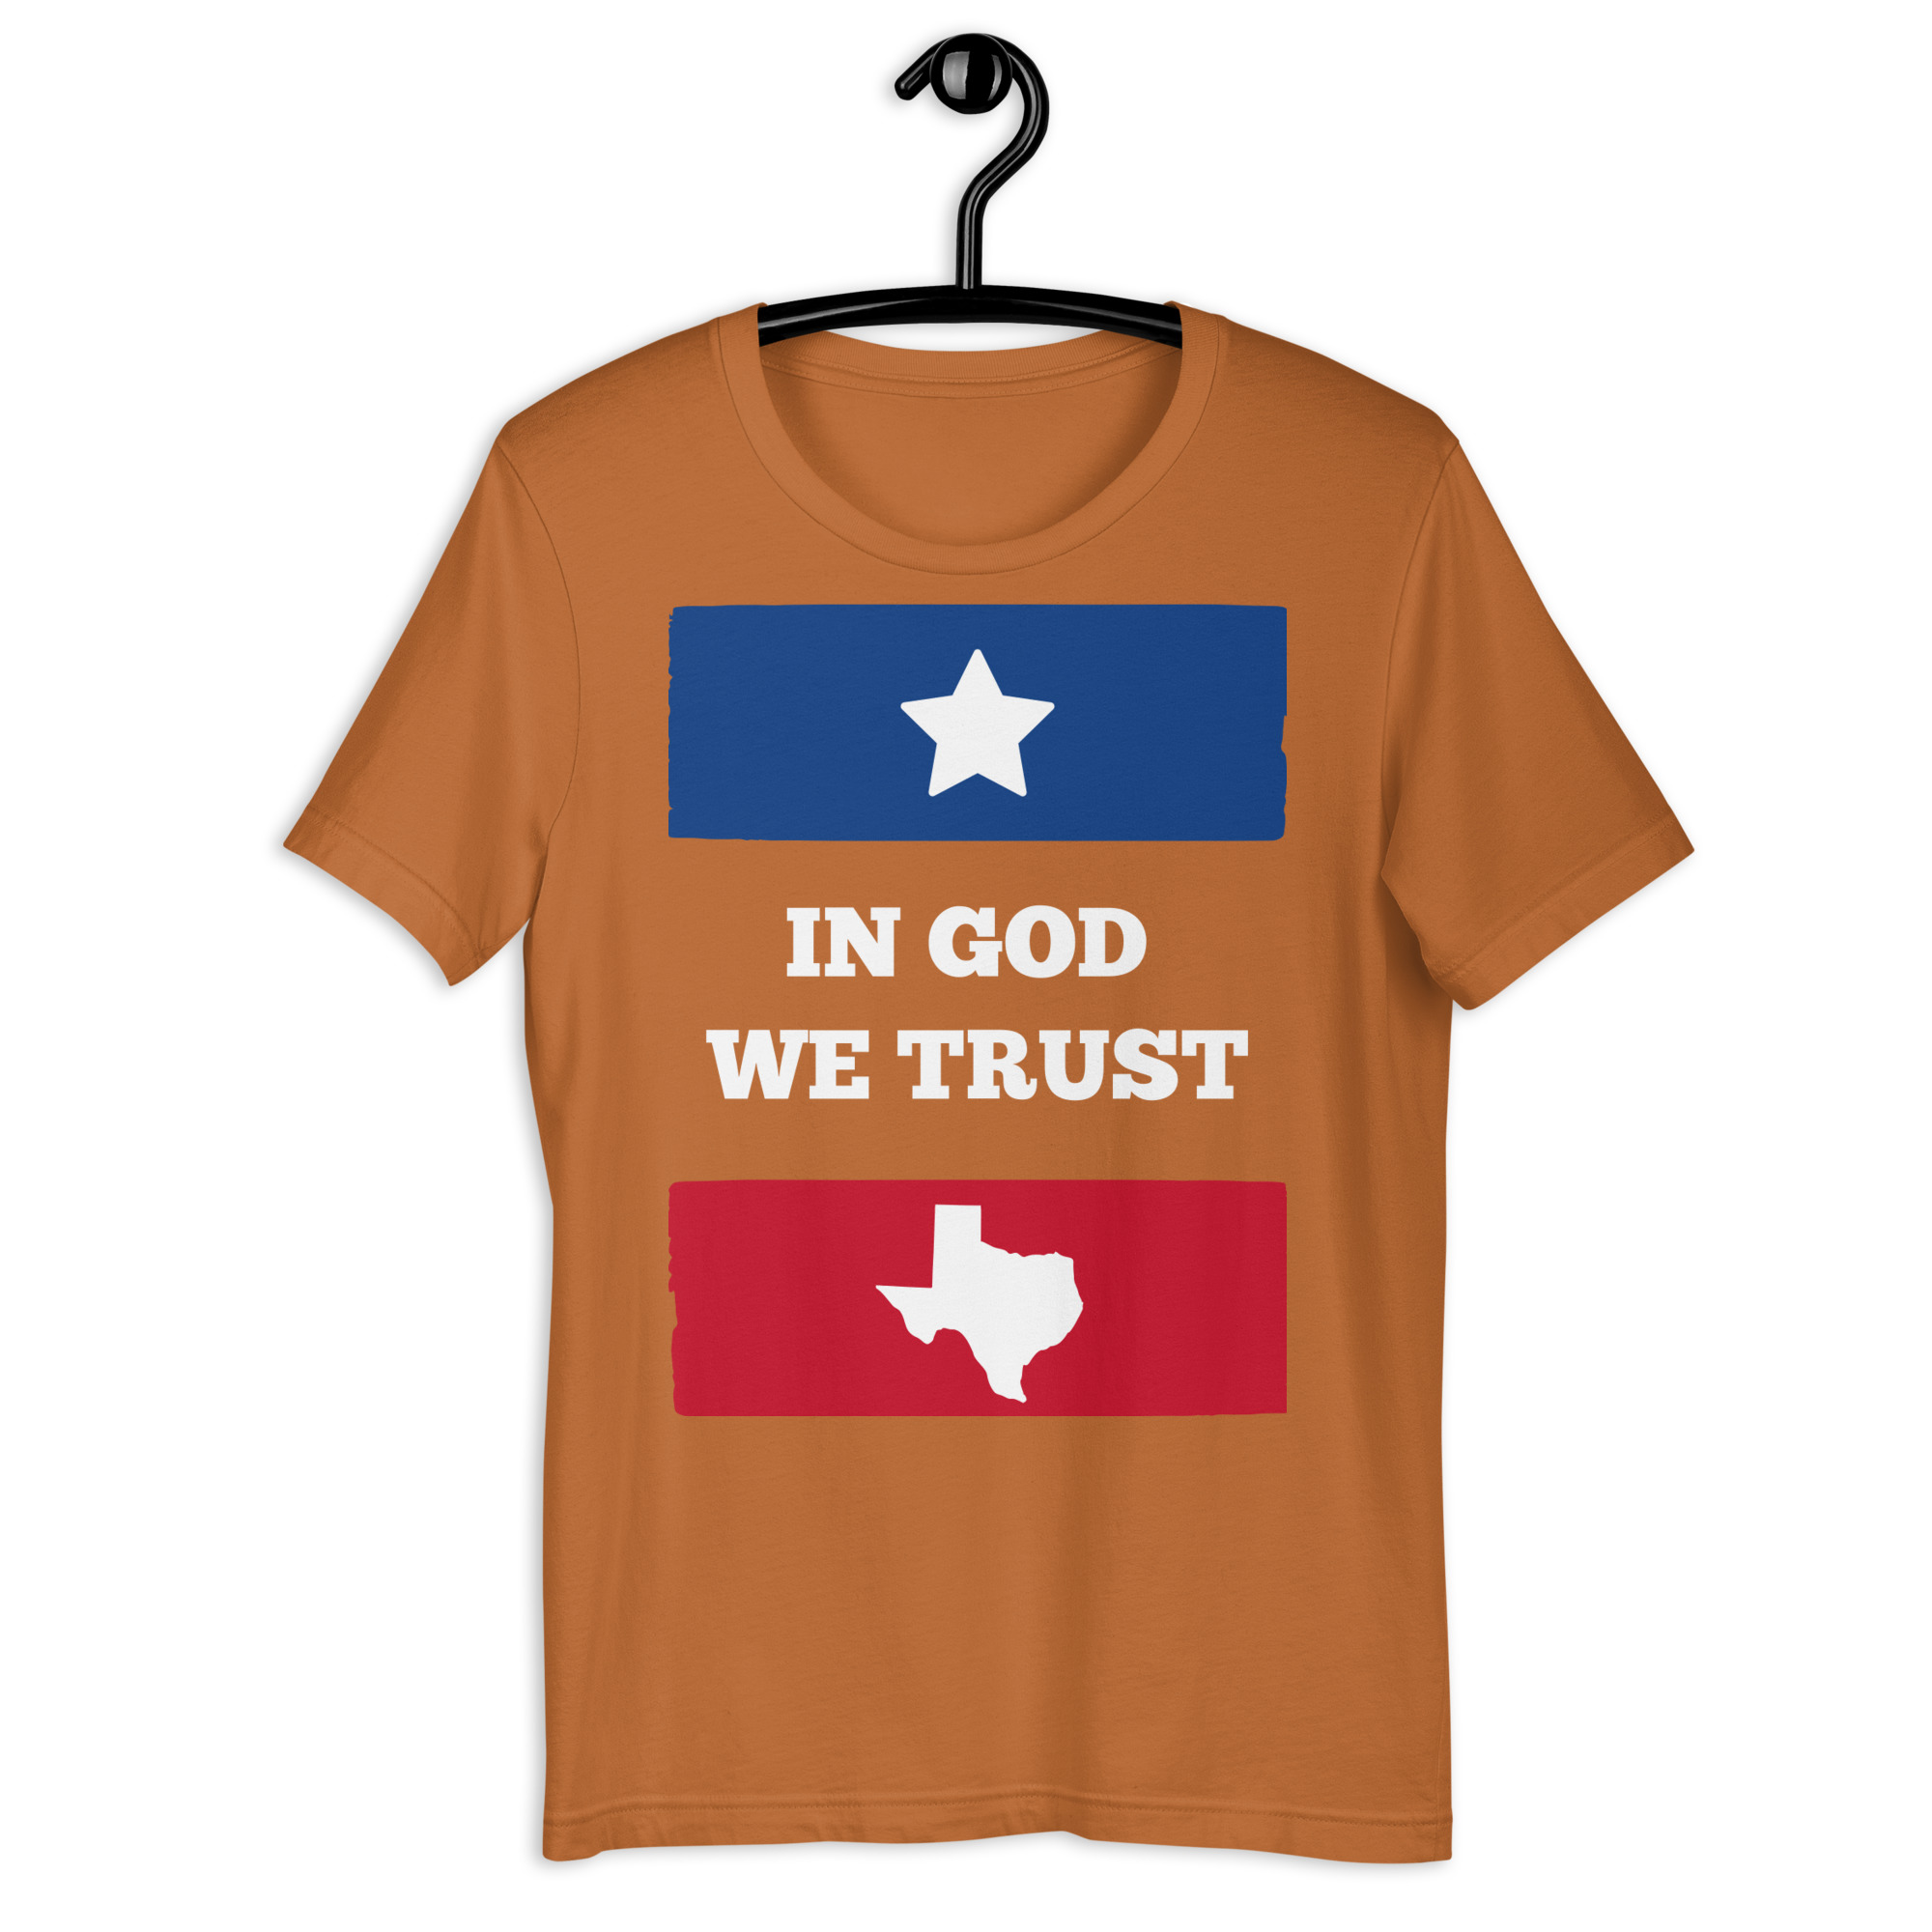 In GOD we TRUST #TEXAS –  Don’t mess with Texas style Short-Sleeve Unisex T-Shirt Apparel Rosary.Team